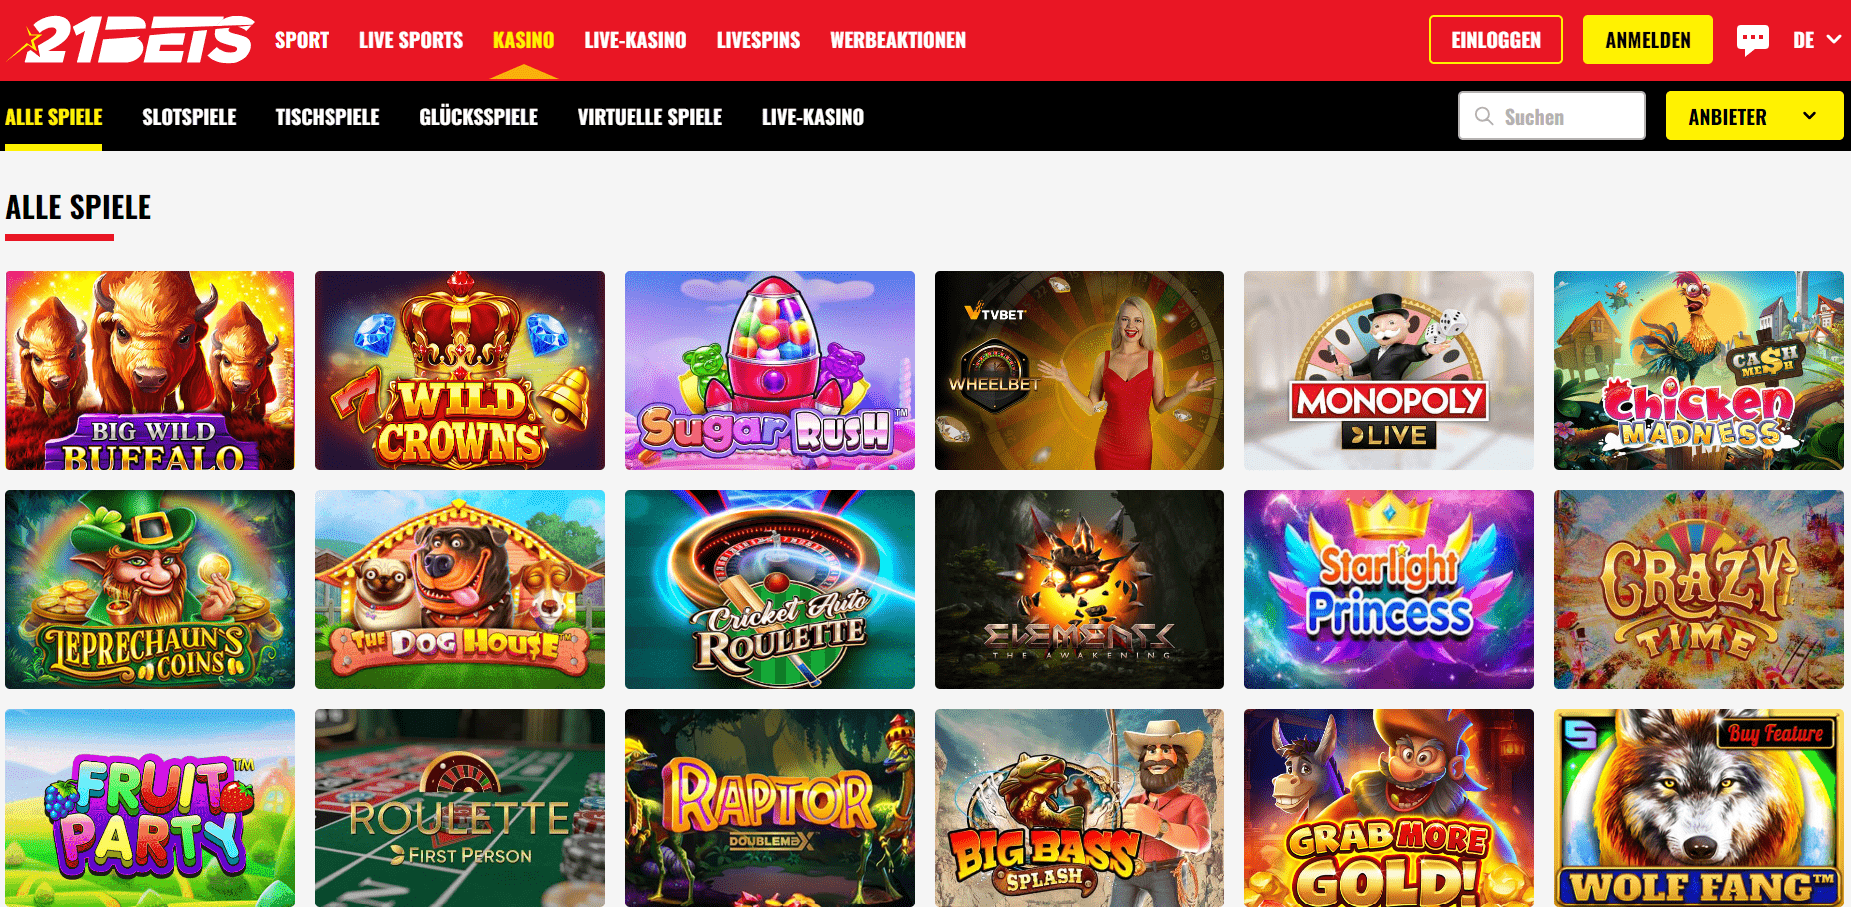 21bets Casino Games